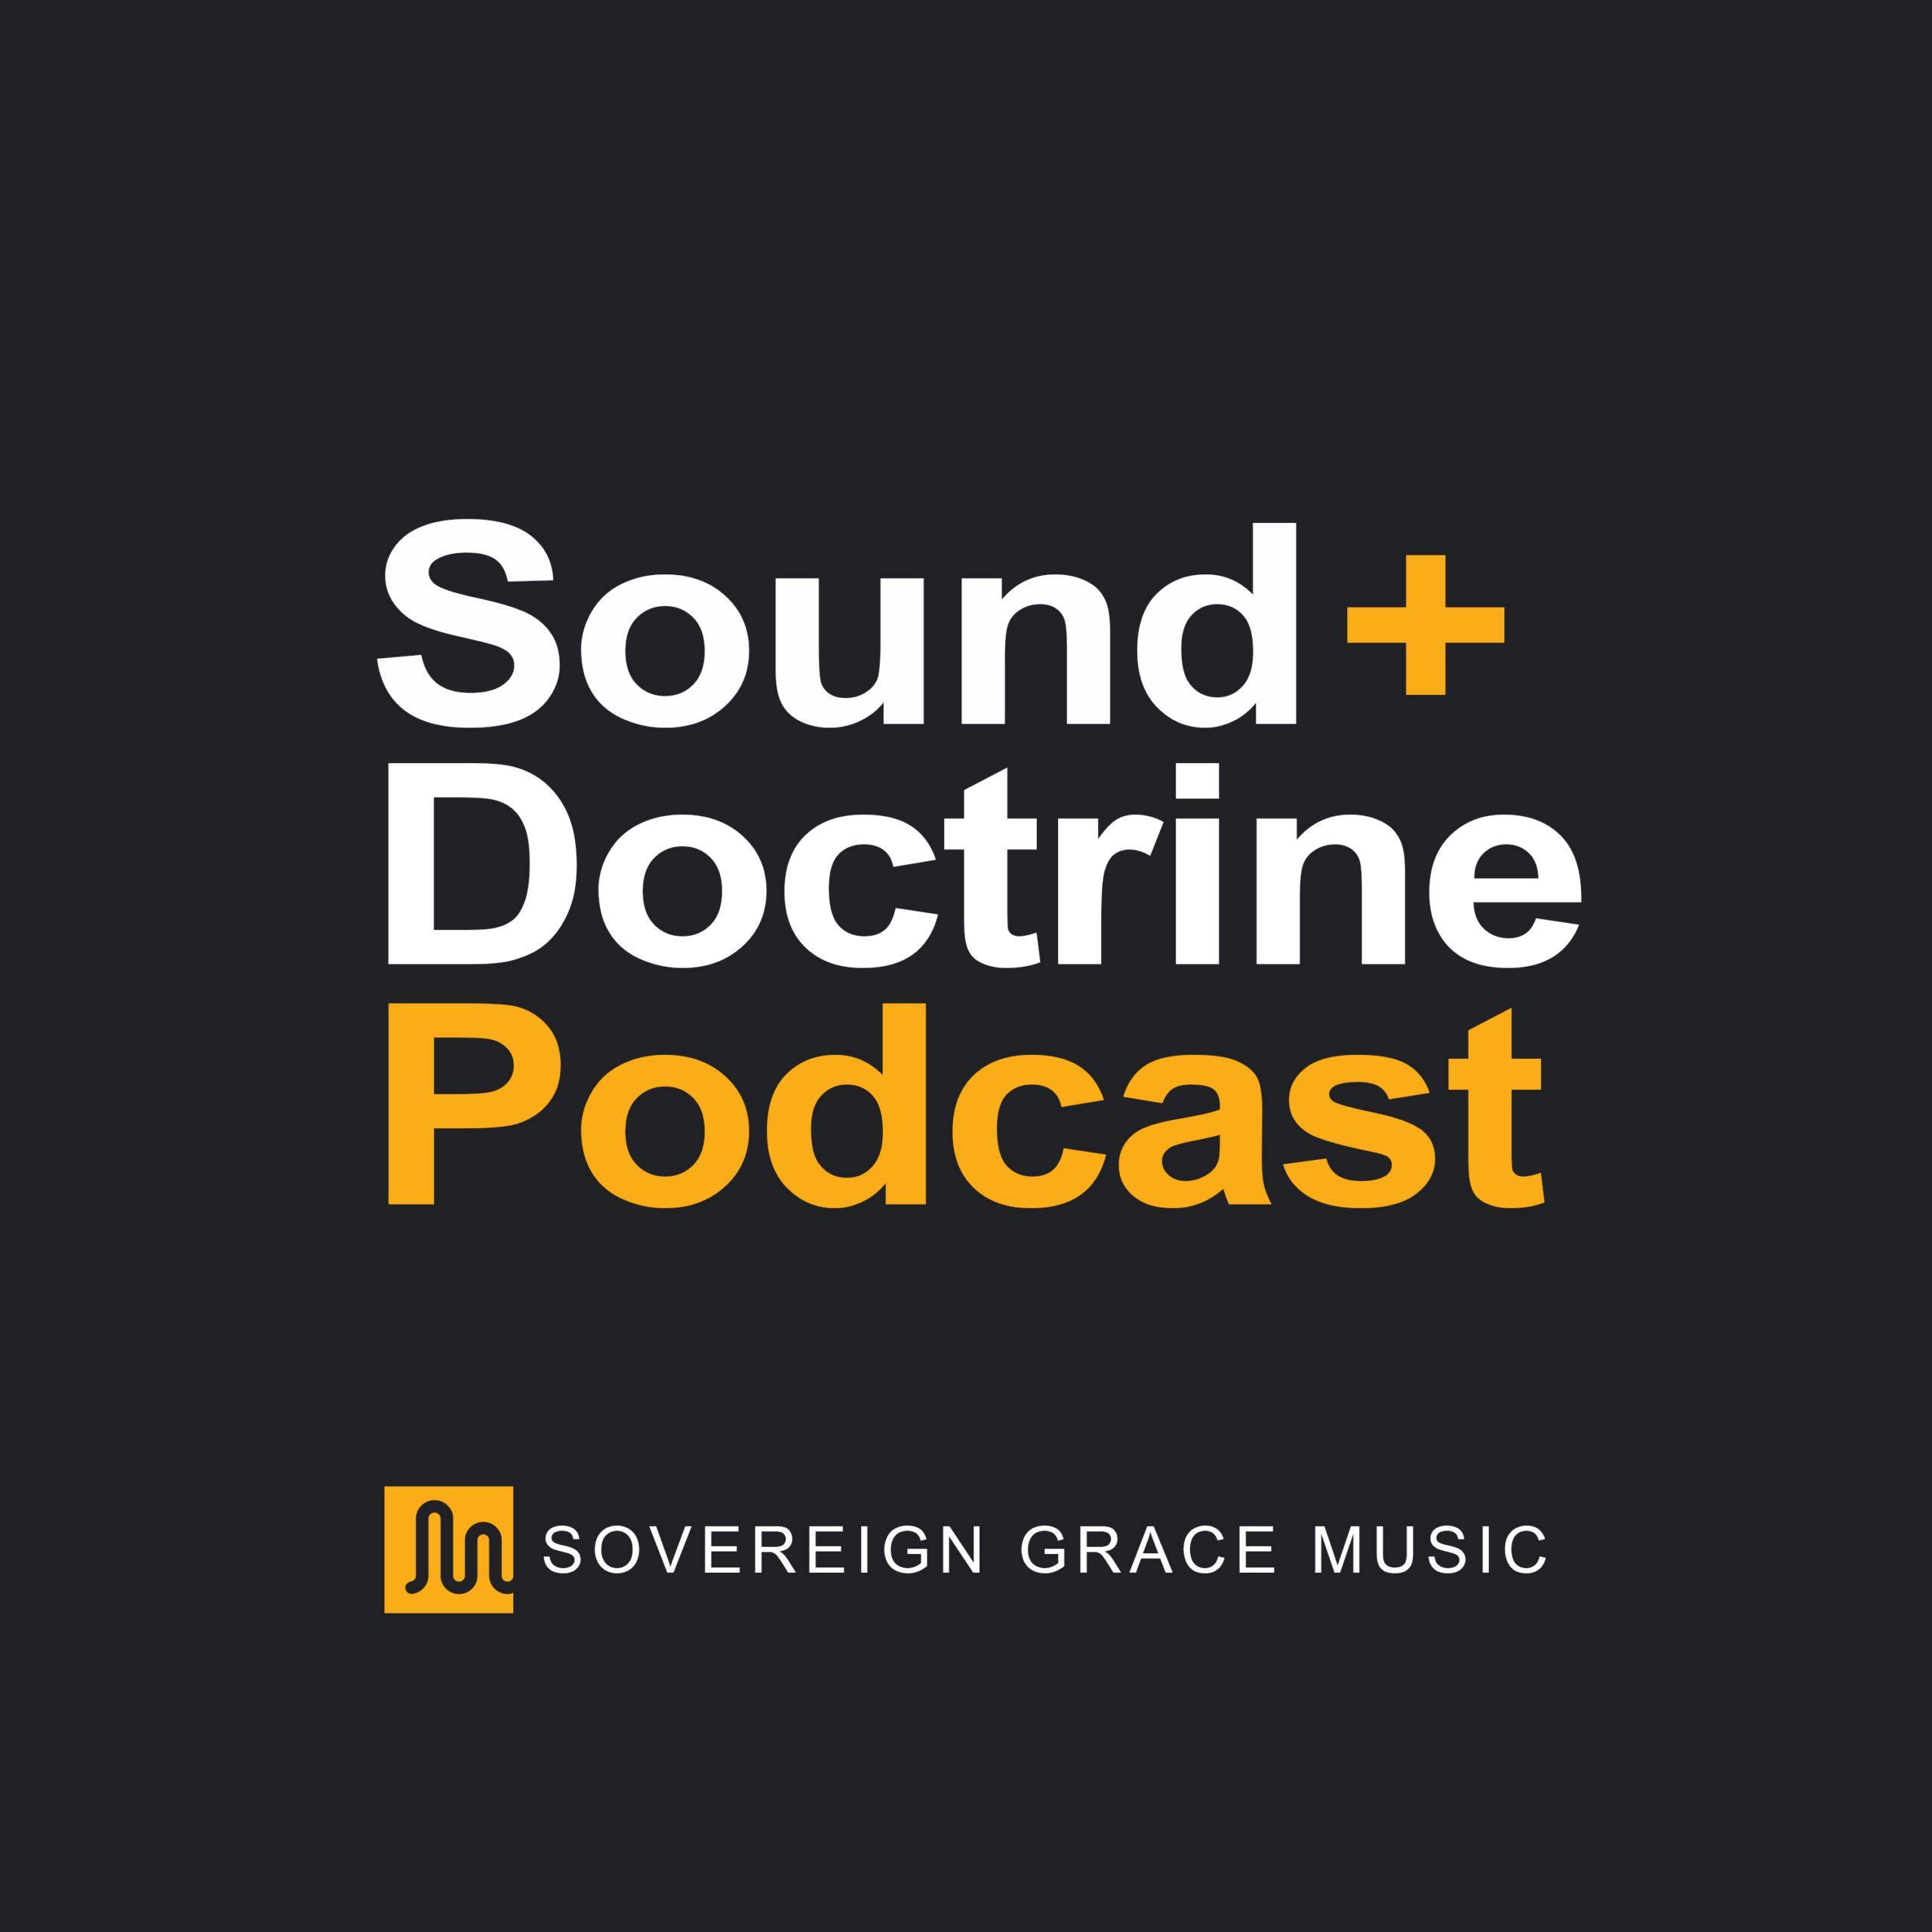 The History of Sovereign Grace Music